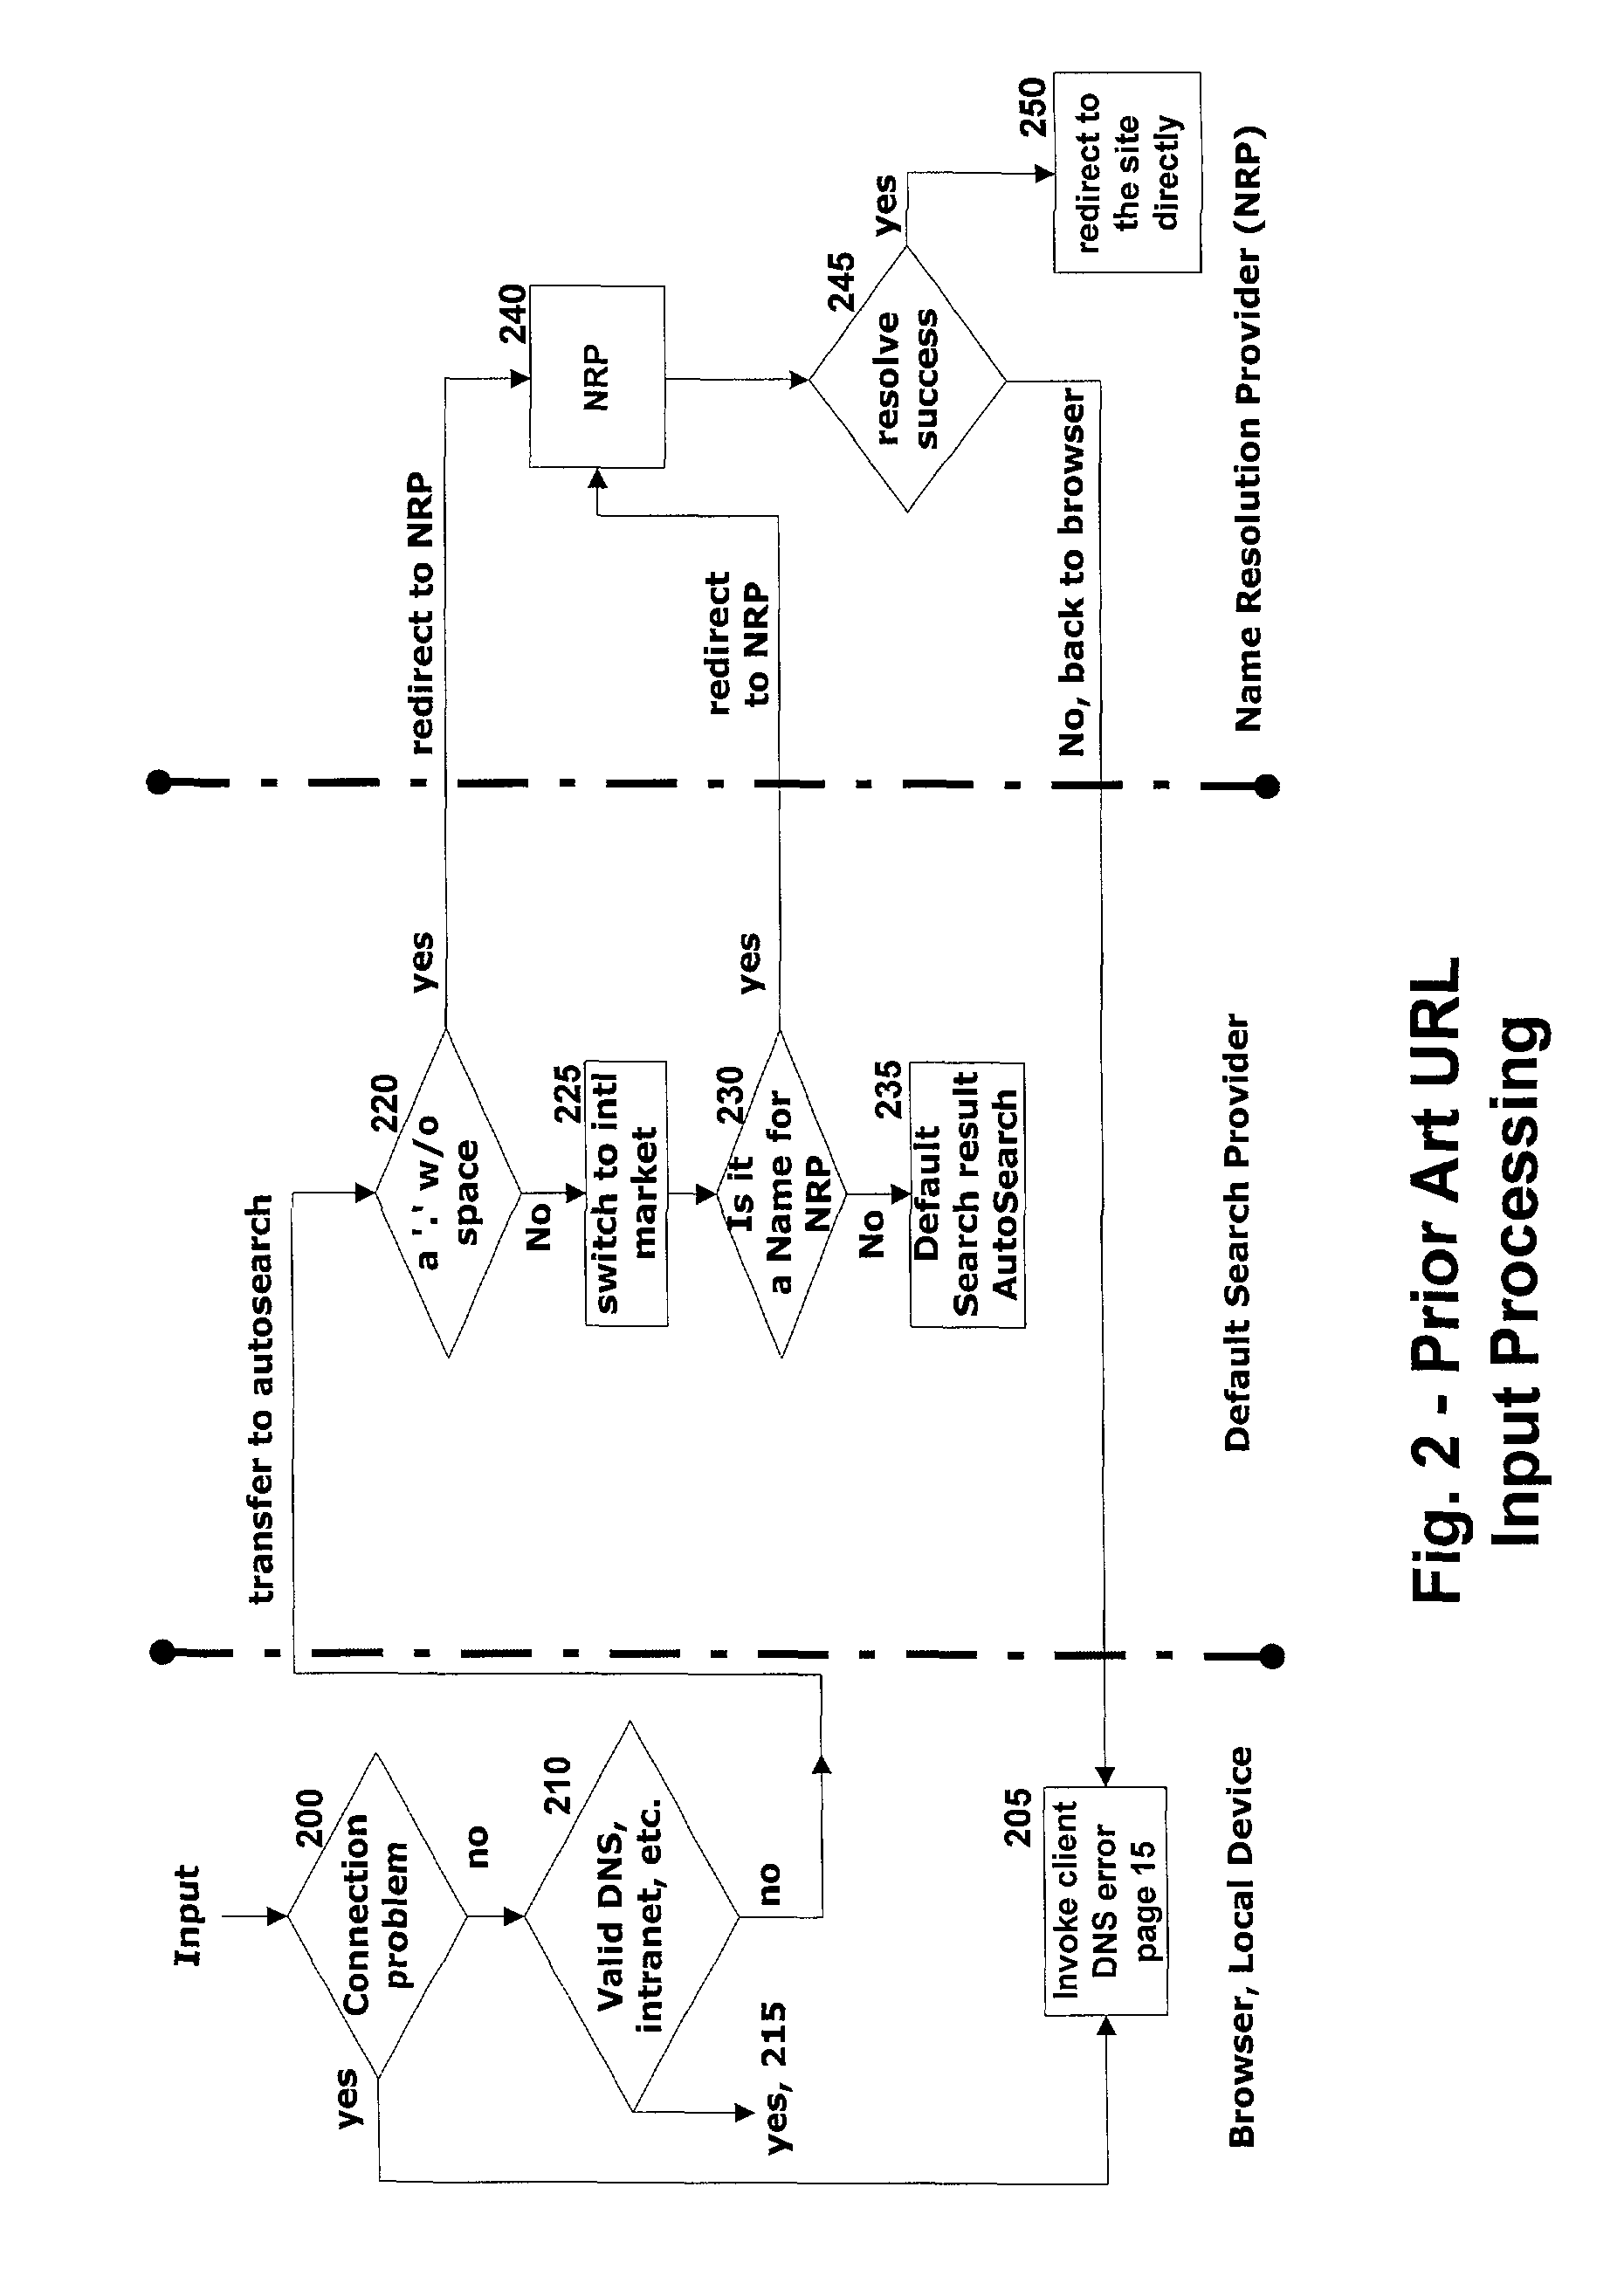 Systems and methods for providing runtime universal resource locator (URL) analysis and correction